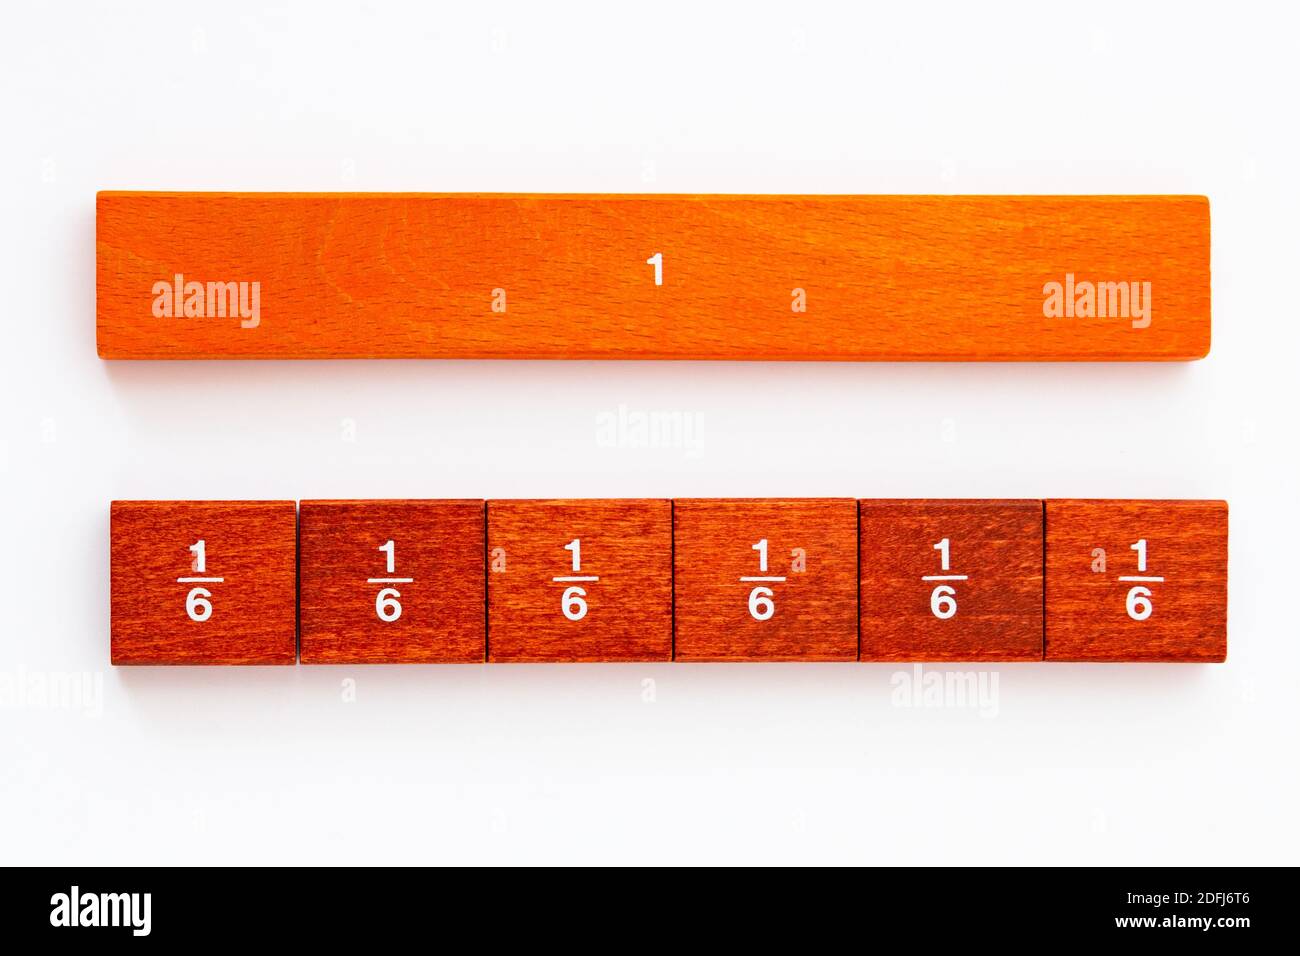 one sixth - wooden maths manipulatives demonstrating one whole divided into six sixths Stock Photo